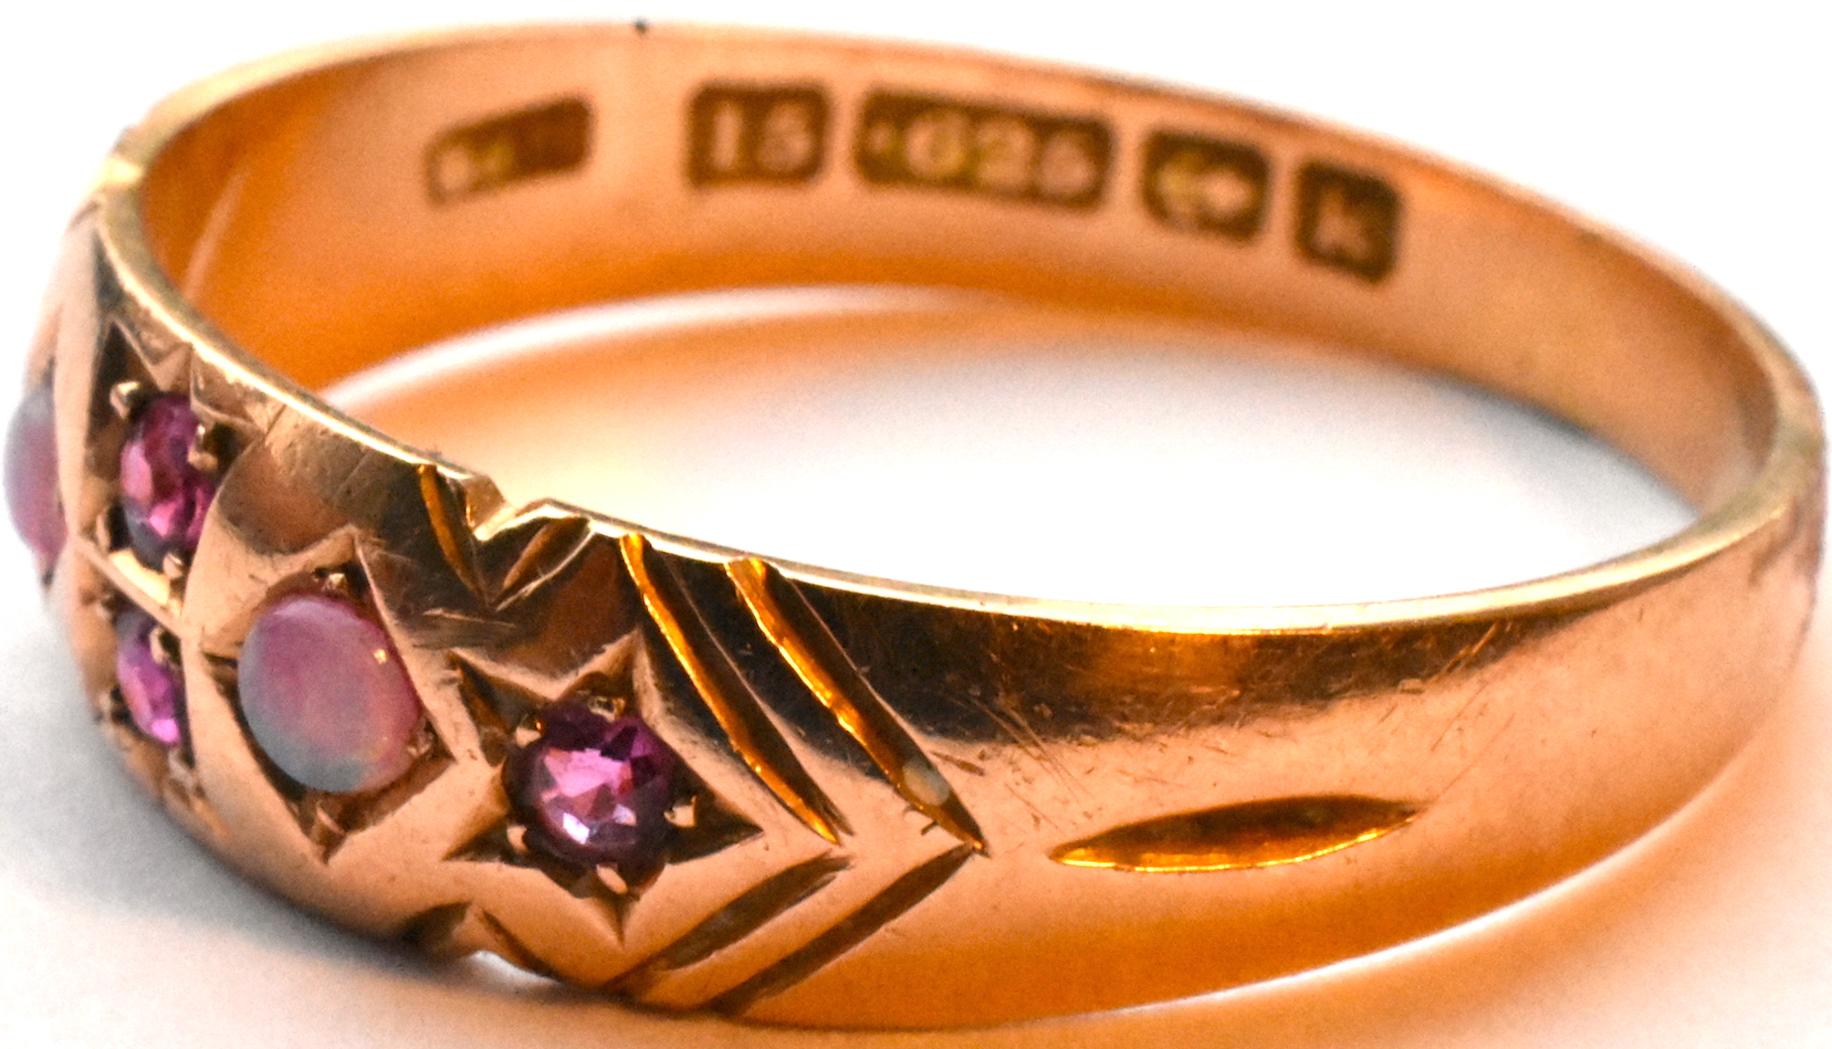 Beautiful antique 15k rose gold gypsy ring with 2 opals set in an incised diamond with 2 rubies at the center and 1 ruby on each side, each ruby set in an incised 5 pointed star (known as a star- setting. Incised lines along each side add interest. 